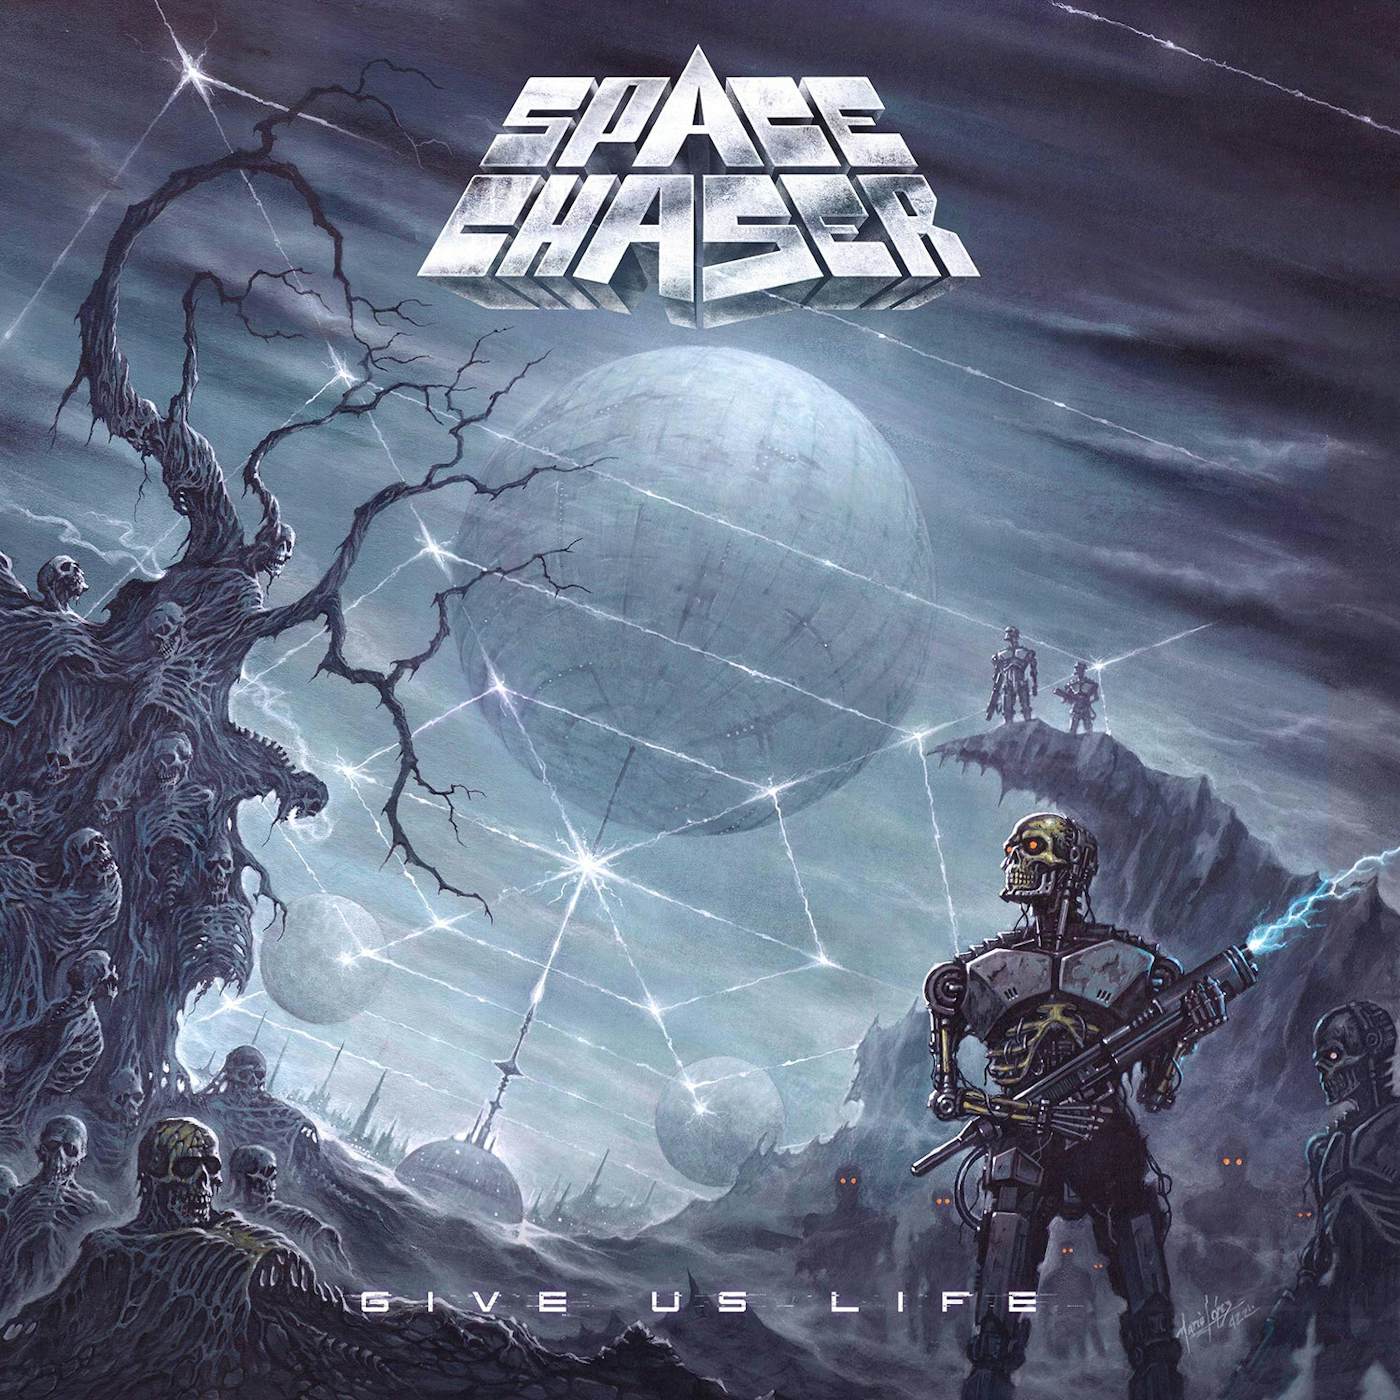 Space Chaser "Give Us Life" CD